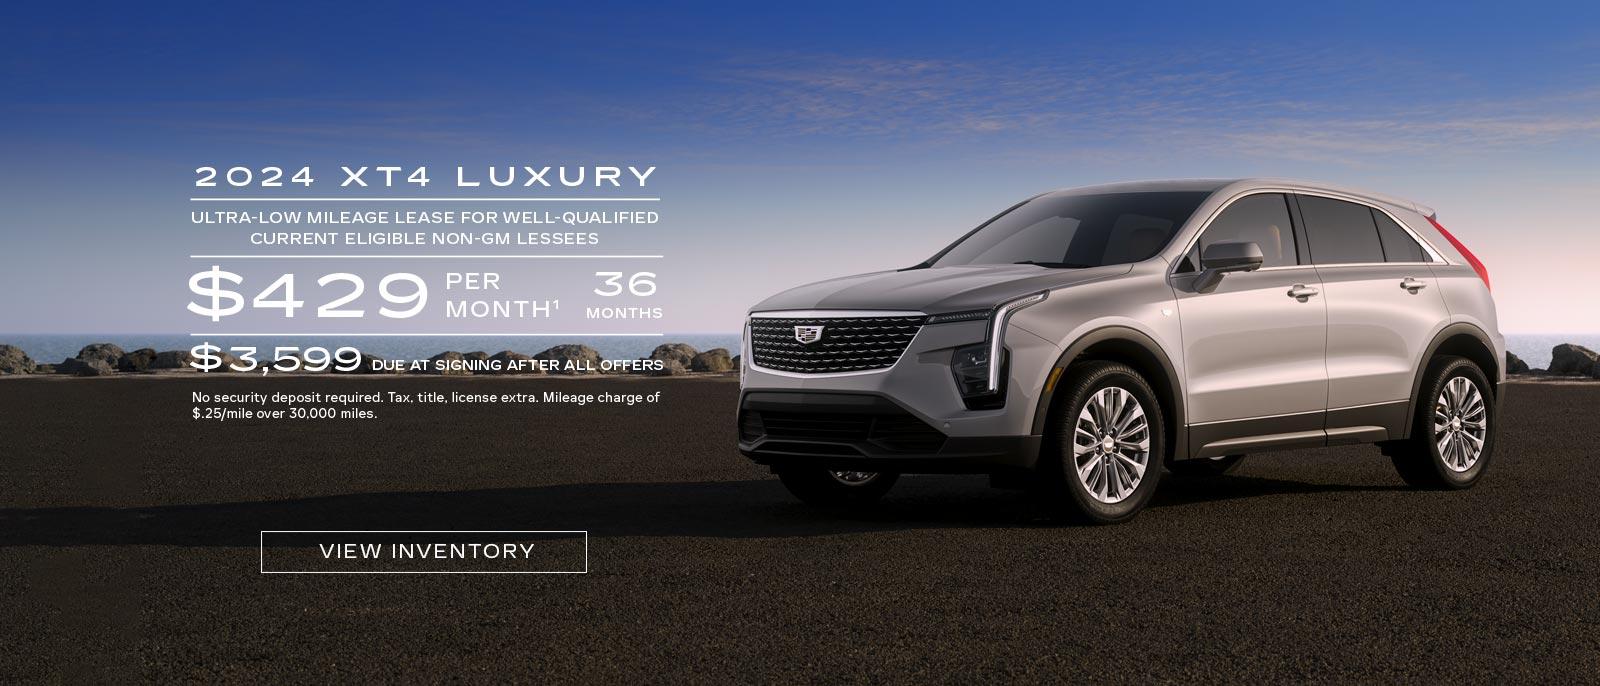 2024 XT4 Luxury Ultra-low mileage lease for well-qualified current eligible NON-GM lessees. $429 per month. 36 months. $3,599 Due at signing after all offers.